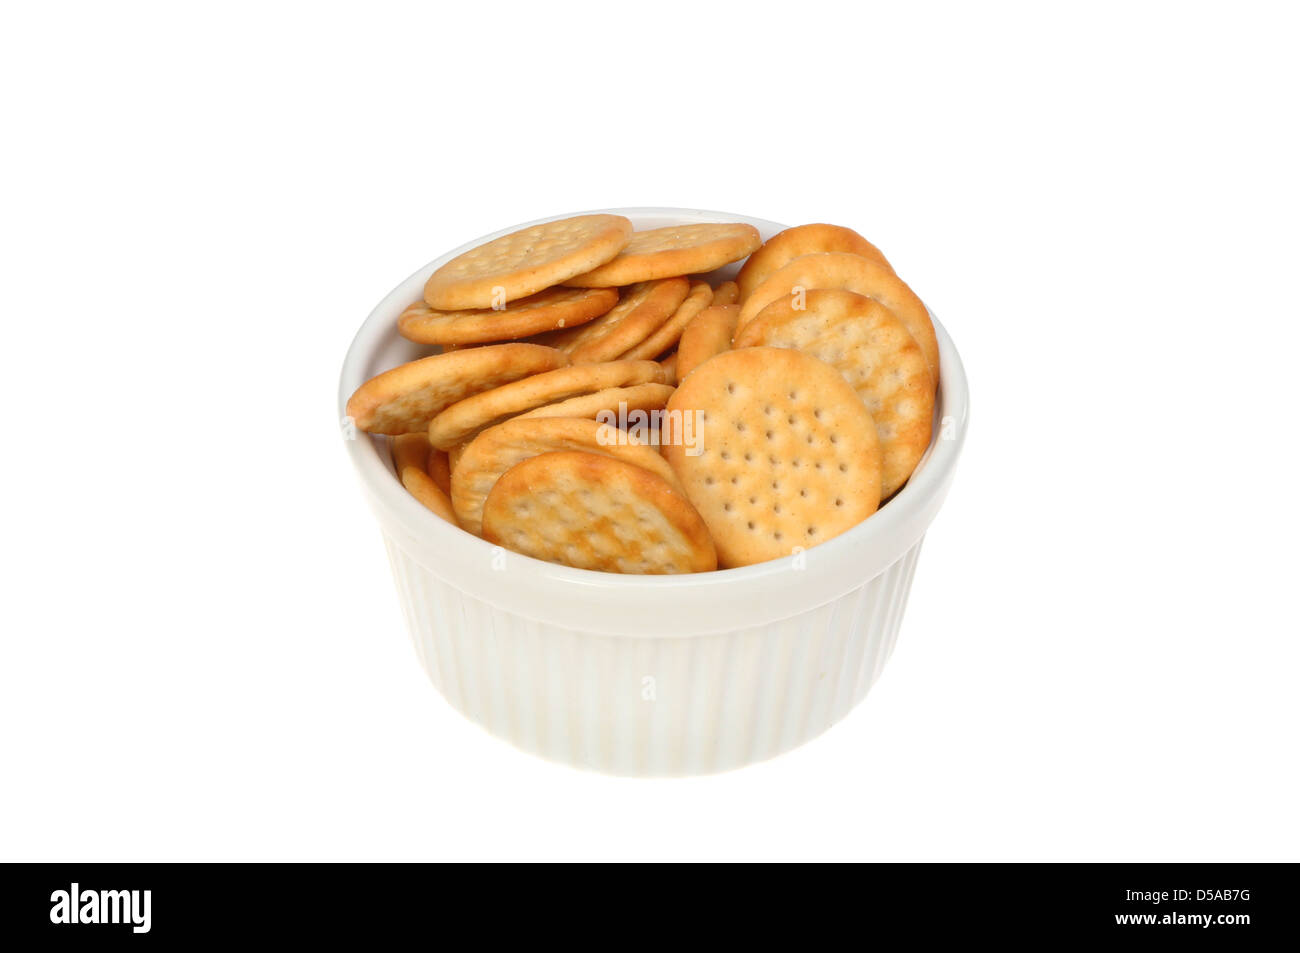 Mini savory cheese biscuits in a ramekin isolated against white Stock Photo